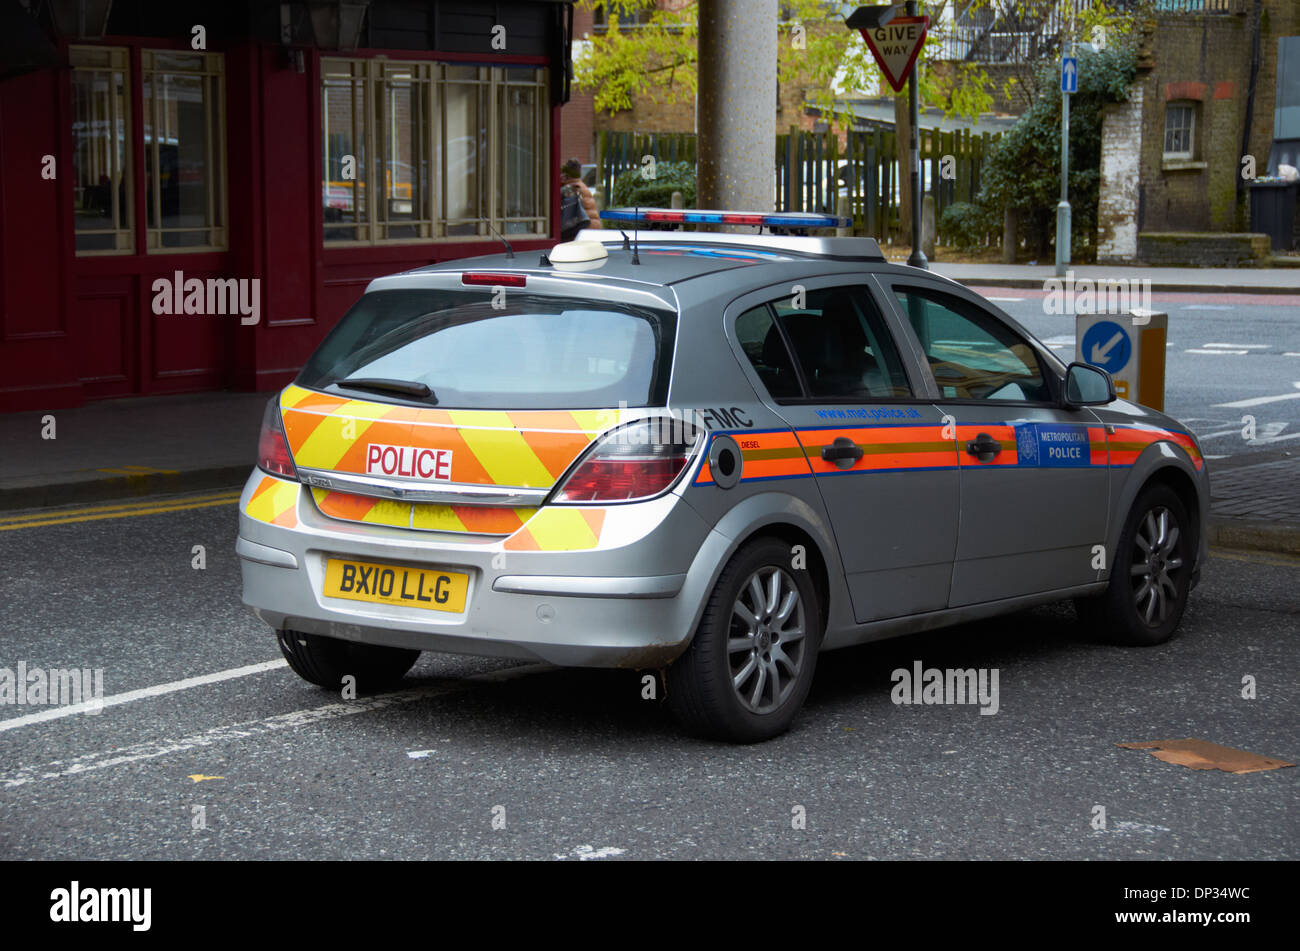 Silver police car parked on the street in Croydon (London) England Stock Photo